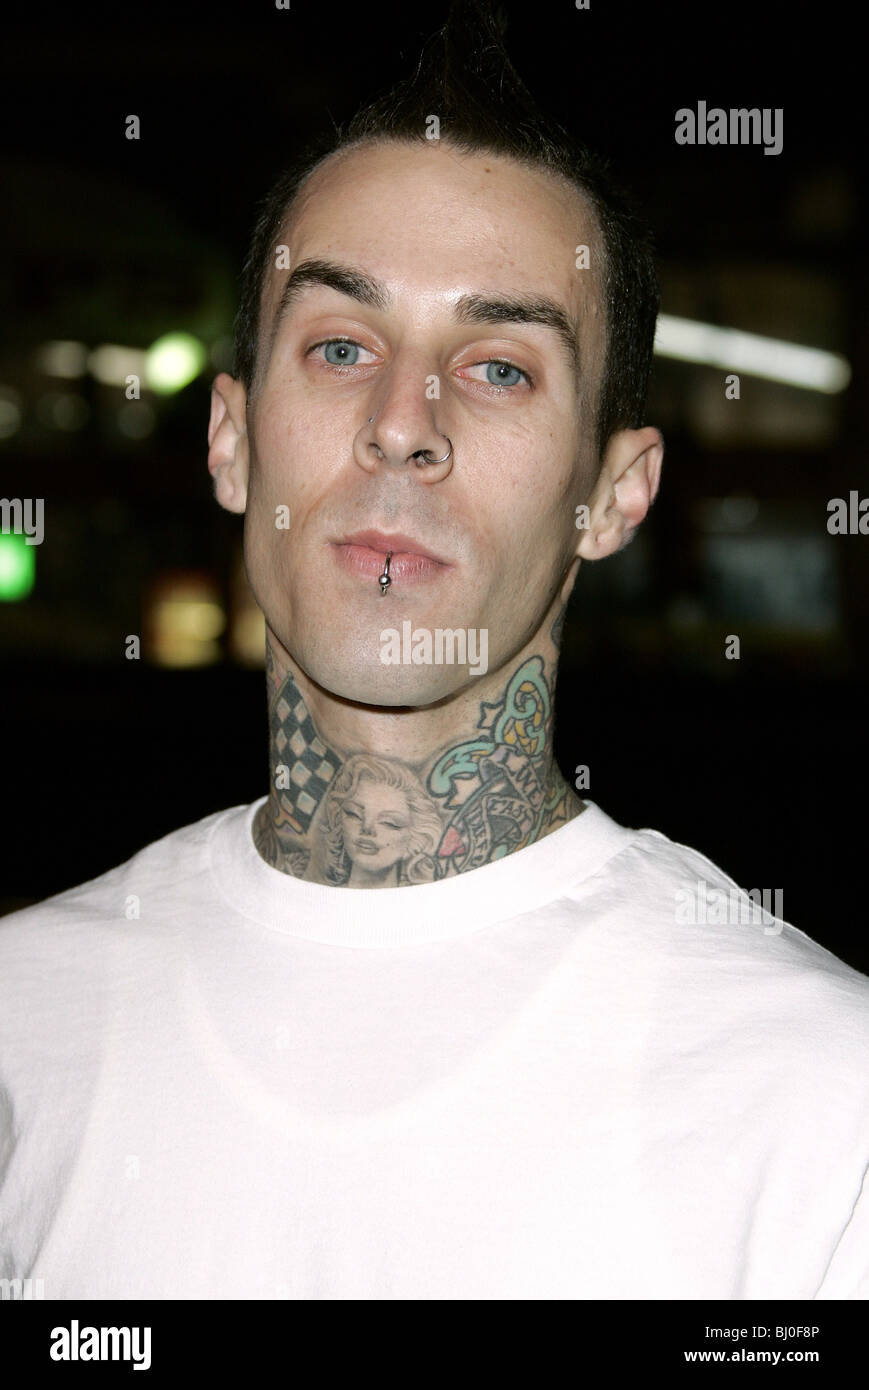 Travis Barker High Resolution Stock Photography And Images Alamy < 1 minute the drummer looks younger than his 42 years (photo: https www alamy com stock photo travis barker drummer blink 182 chinese theatre hollywood los angeles 28286182 html